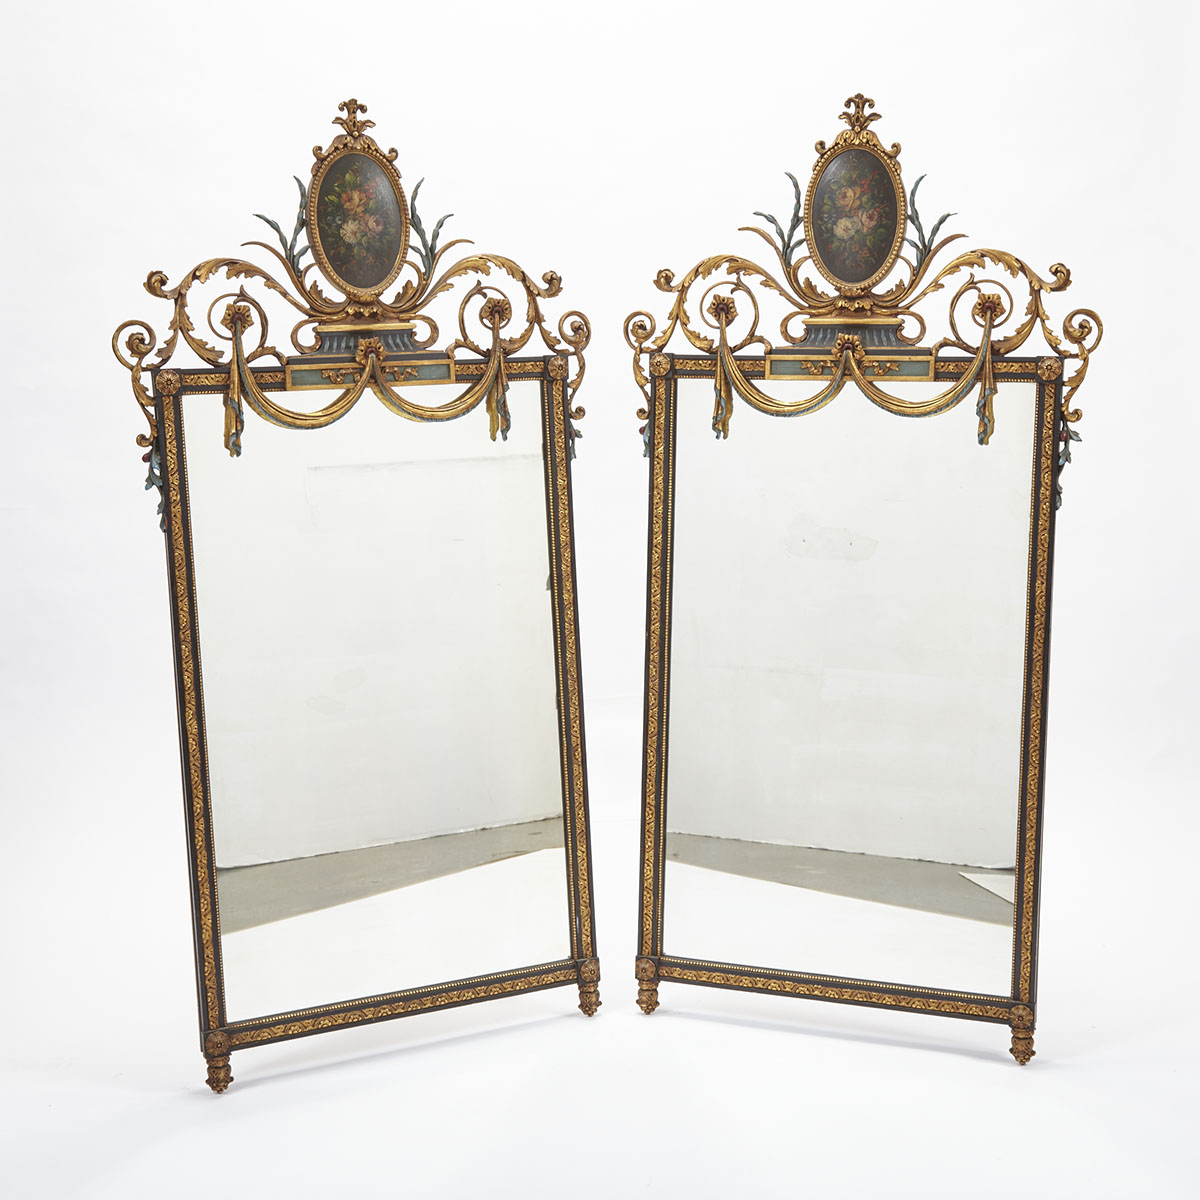 Pair of Italian Neoclassical Polychromed and Parcel Gilt Mirrors, early 20th century